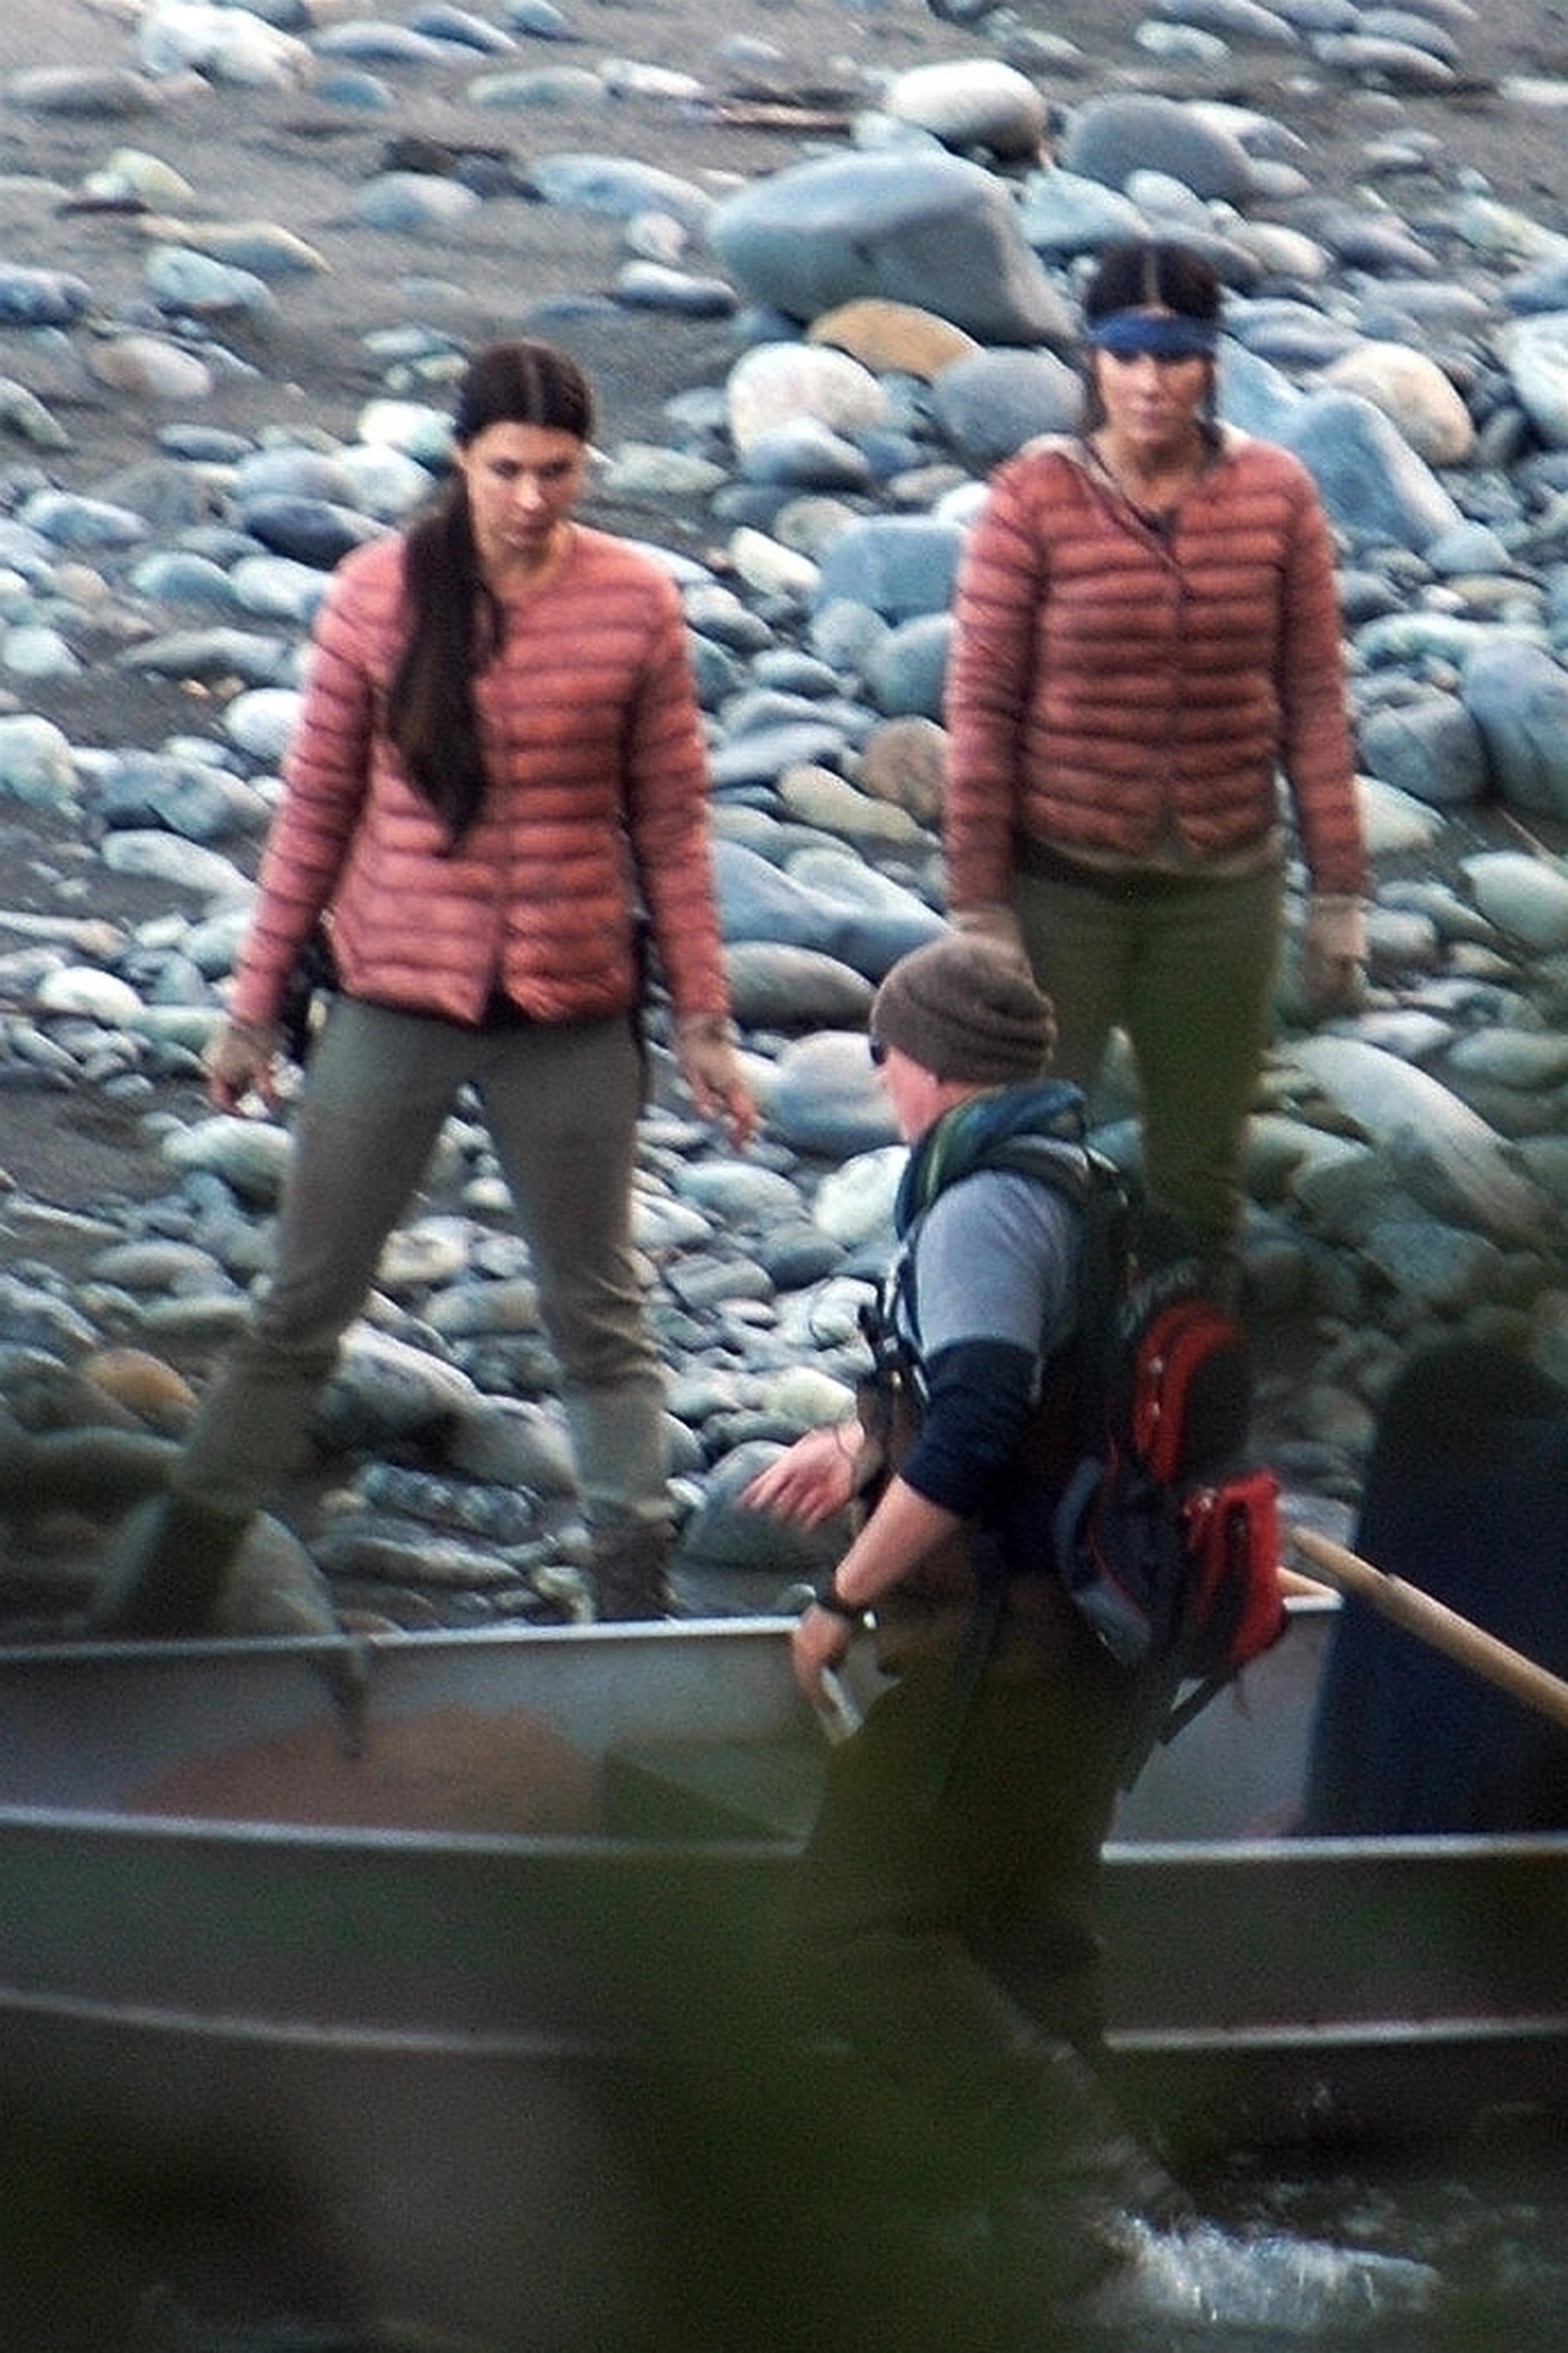 Sandra and her body double standing on rocks and wearing matching bubble sweaters